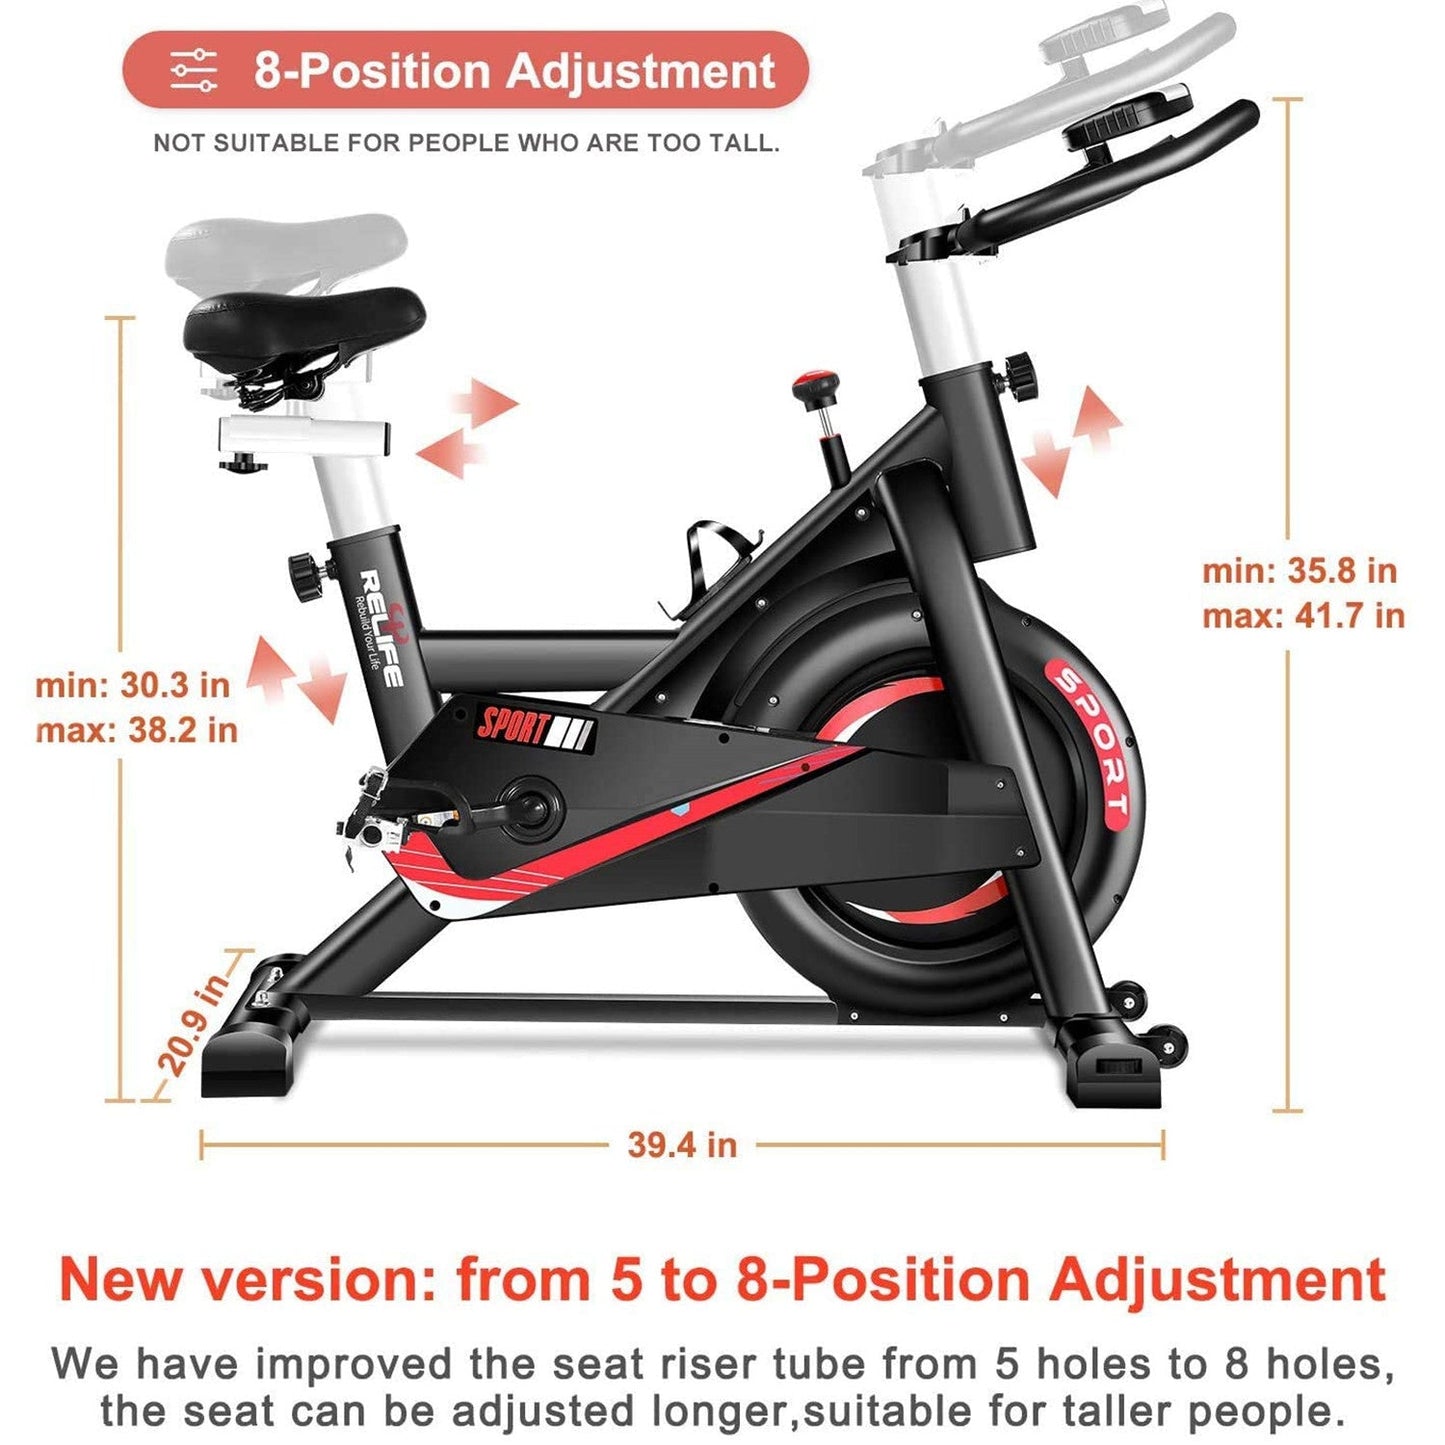 RELIFE Stationary Indoor Exercise Bike with Resistance for Home